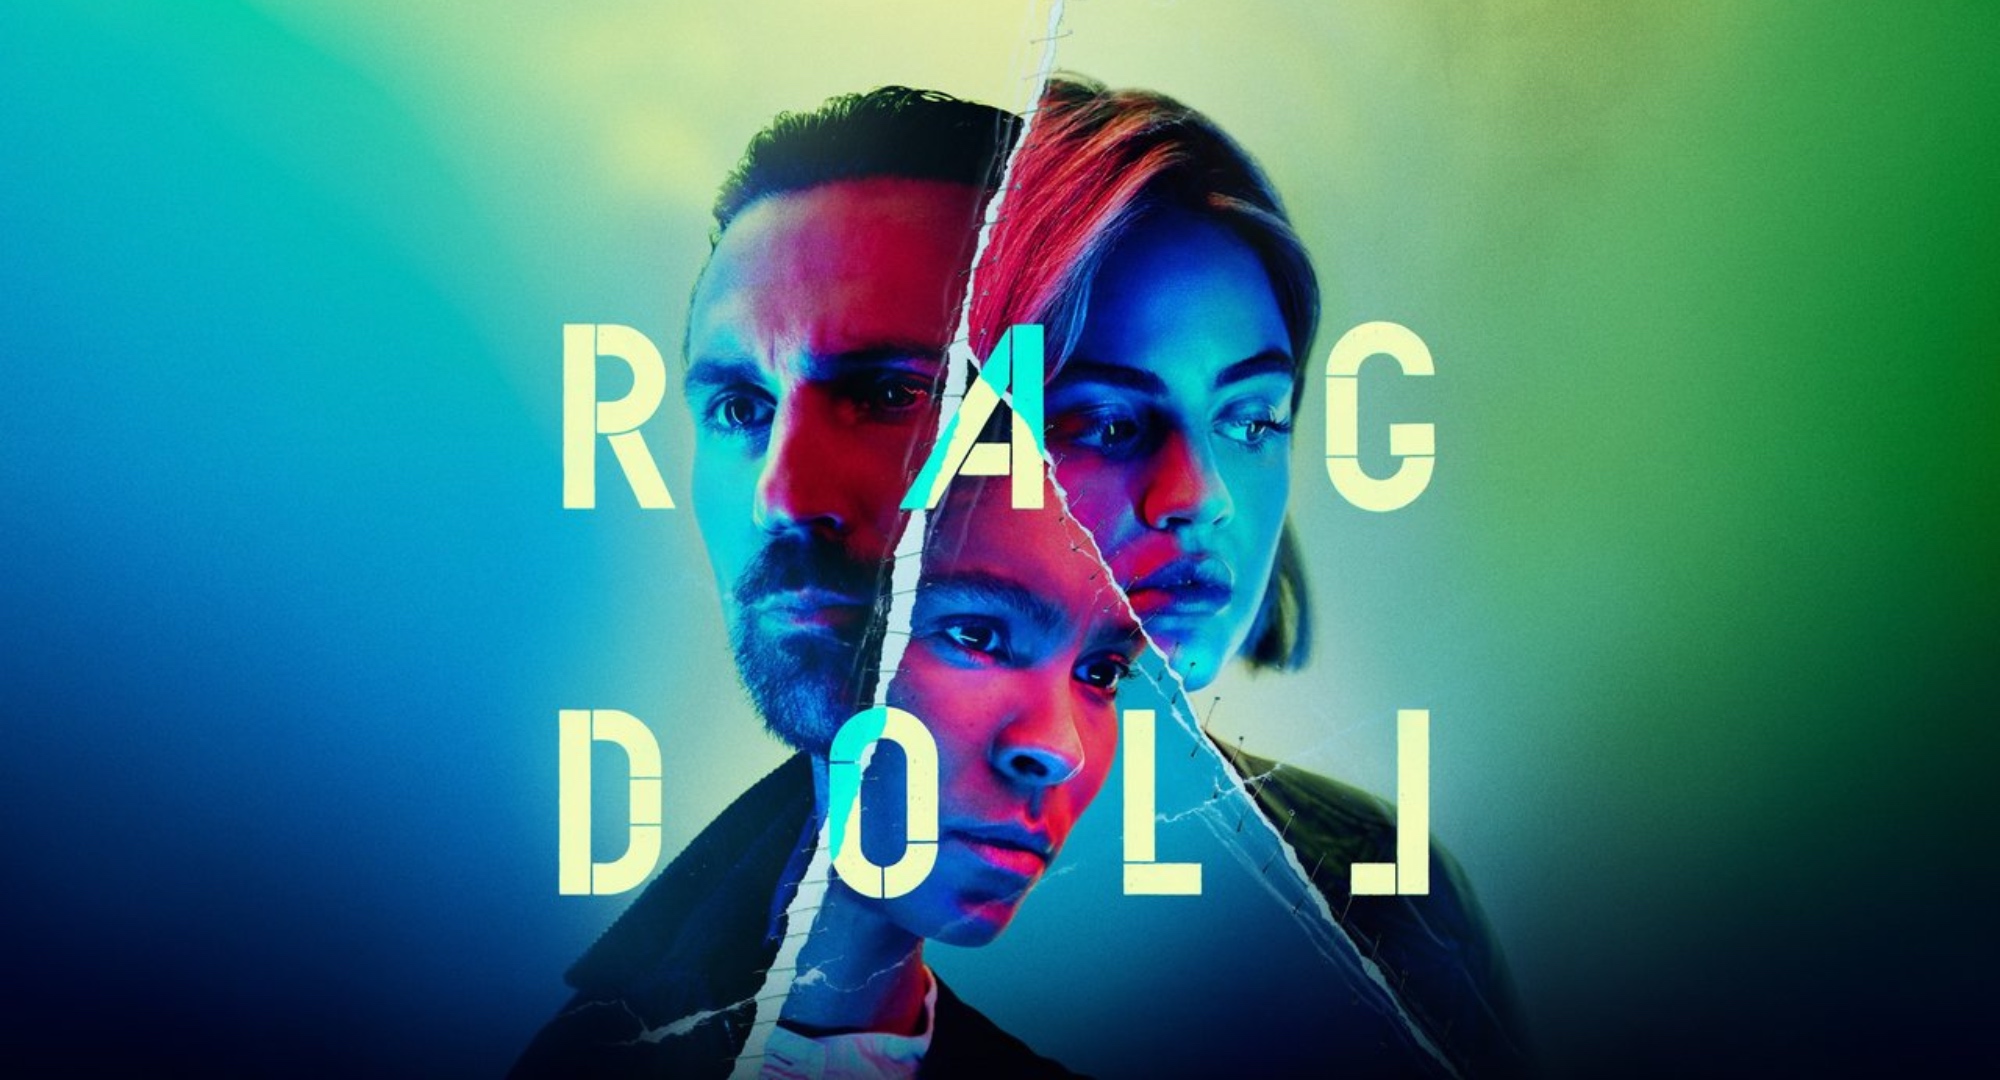 Main characters of 'Ragdoll' series poster based on a book series